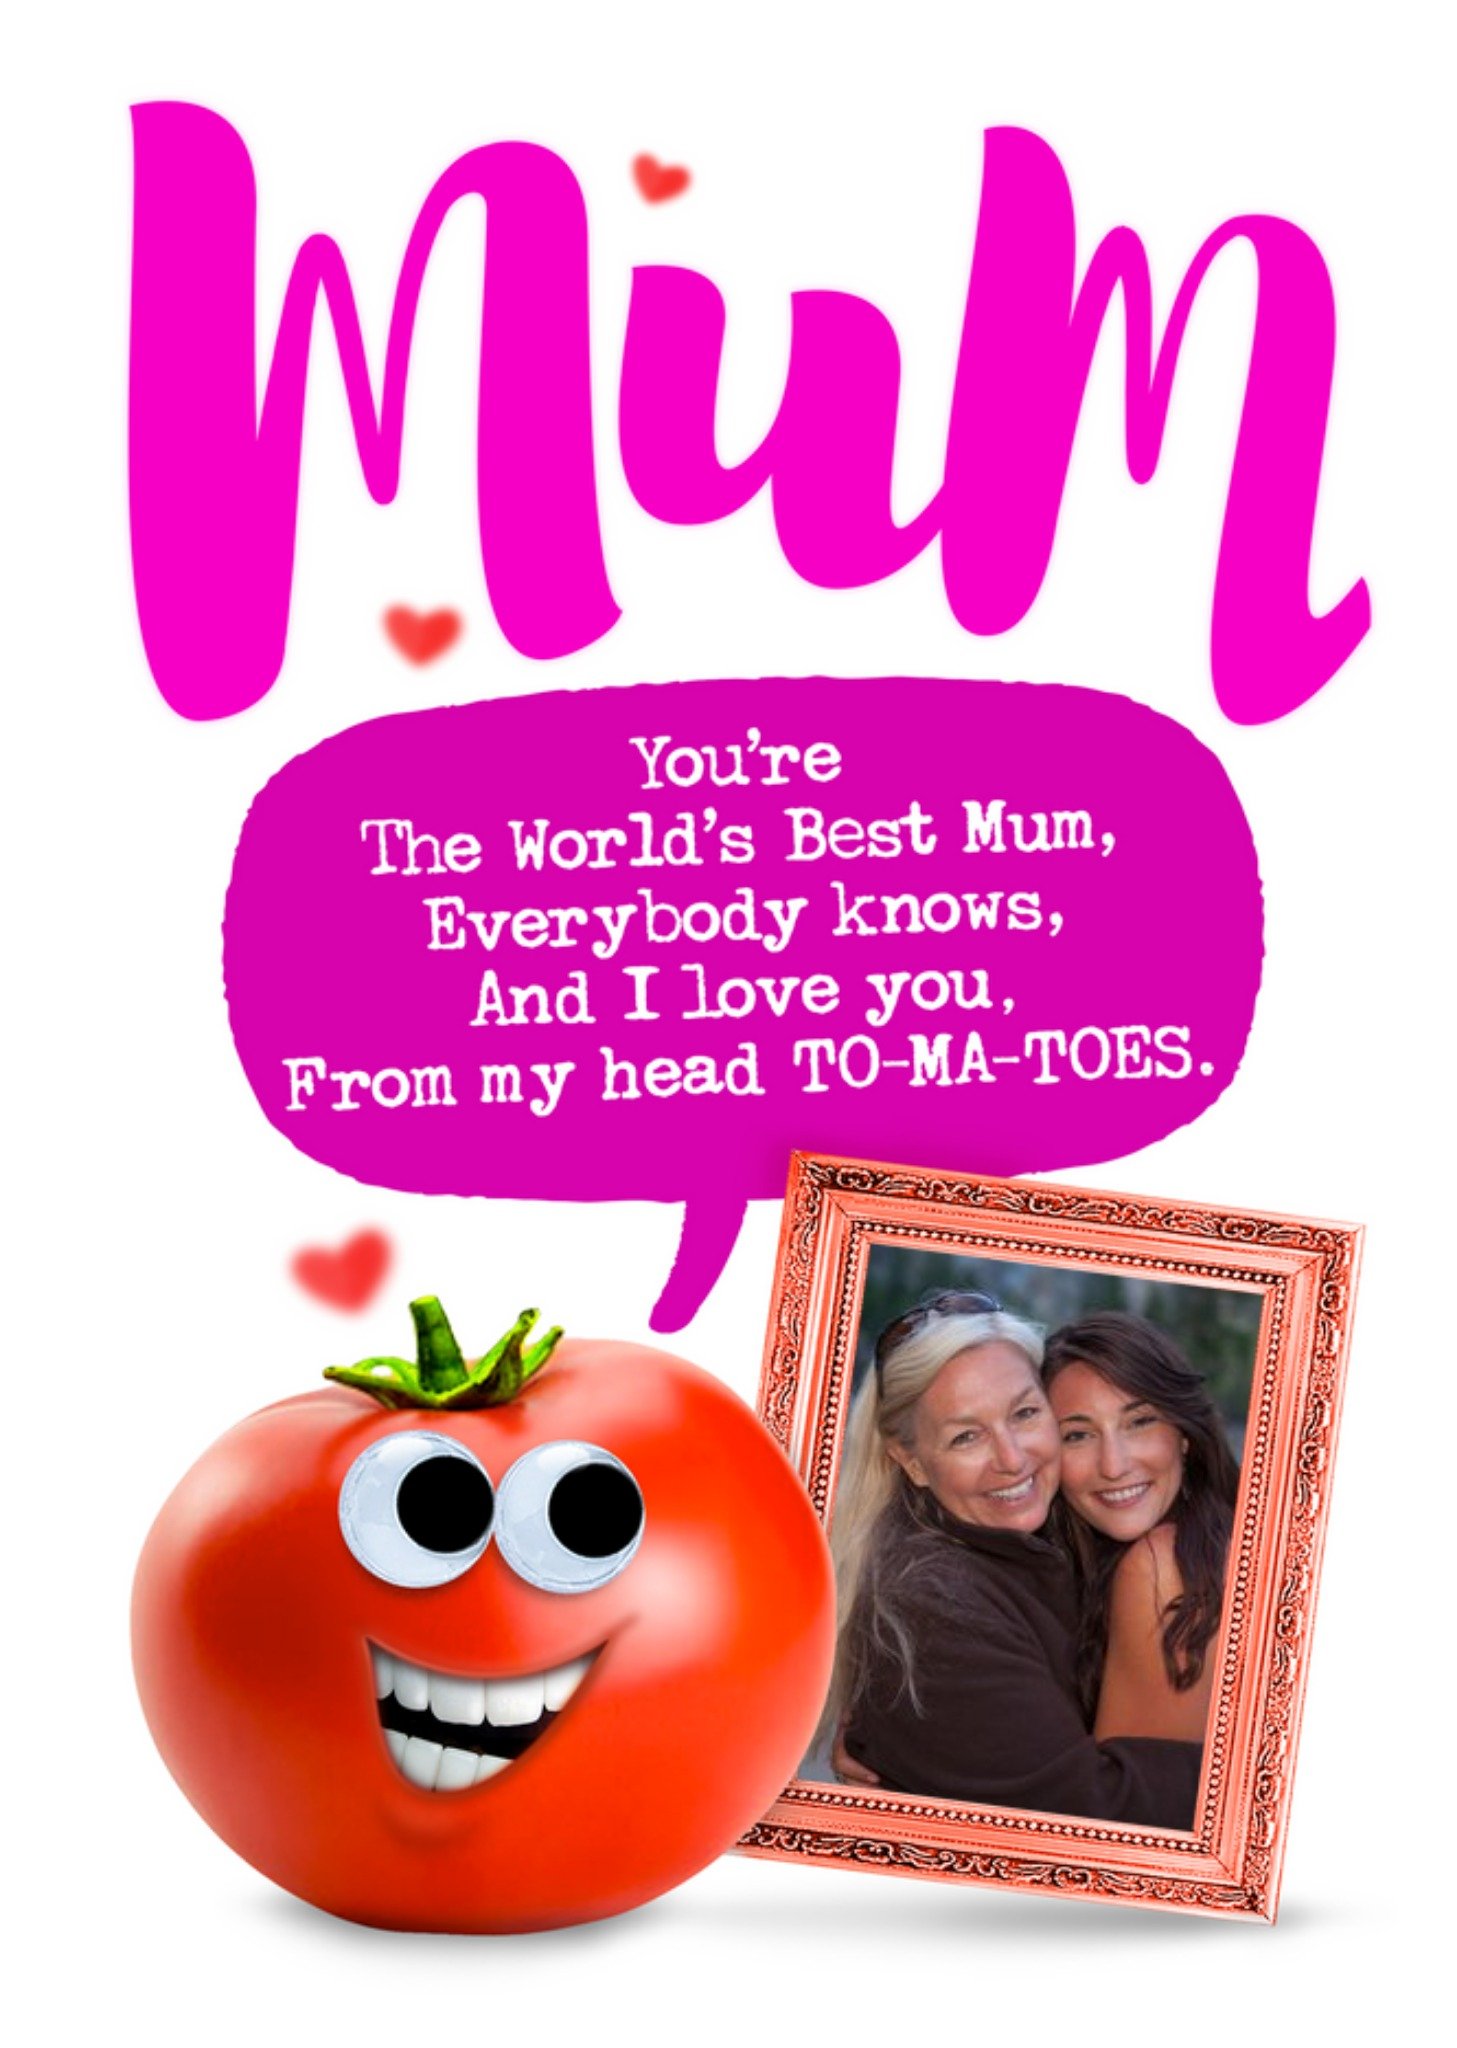 Moonpig Love You From Your Head Tomatoes Funny Pun Photo Upload Card Ecard